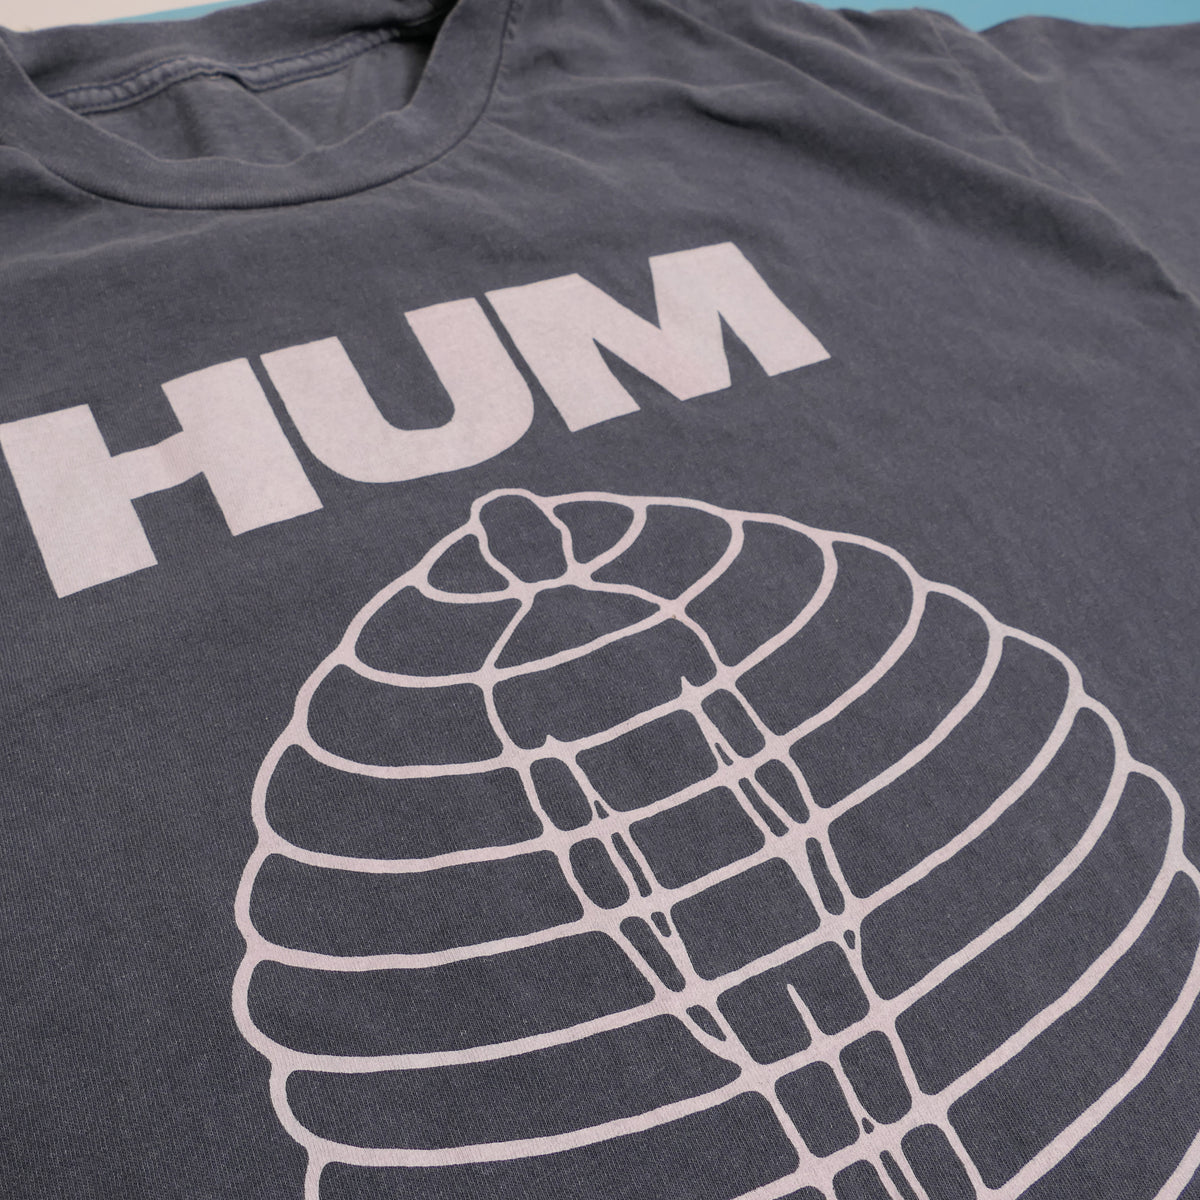 Hum Astral Projection Tee